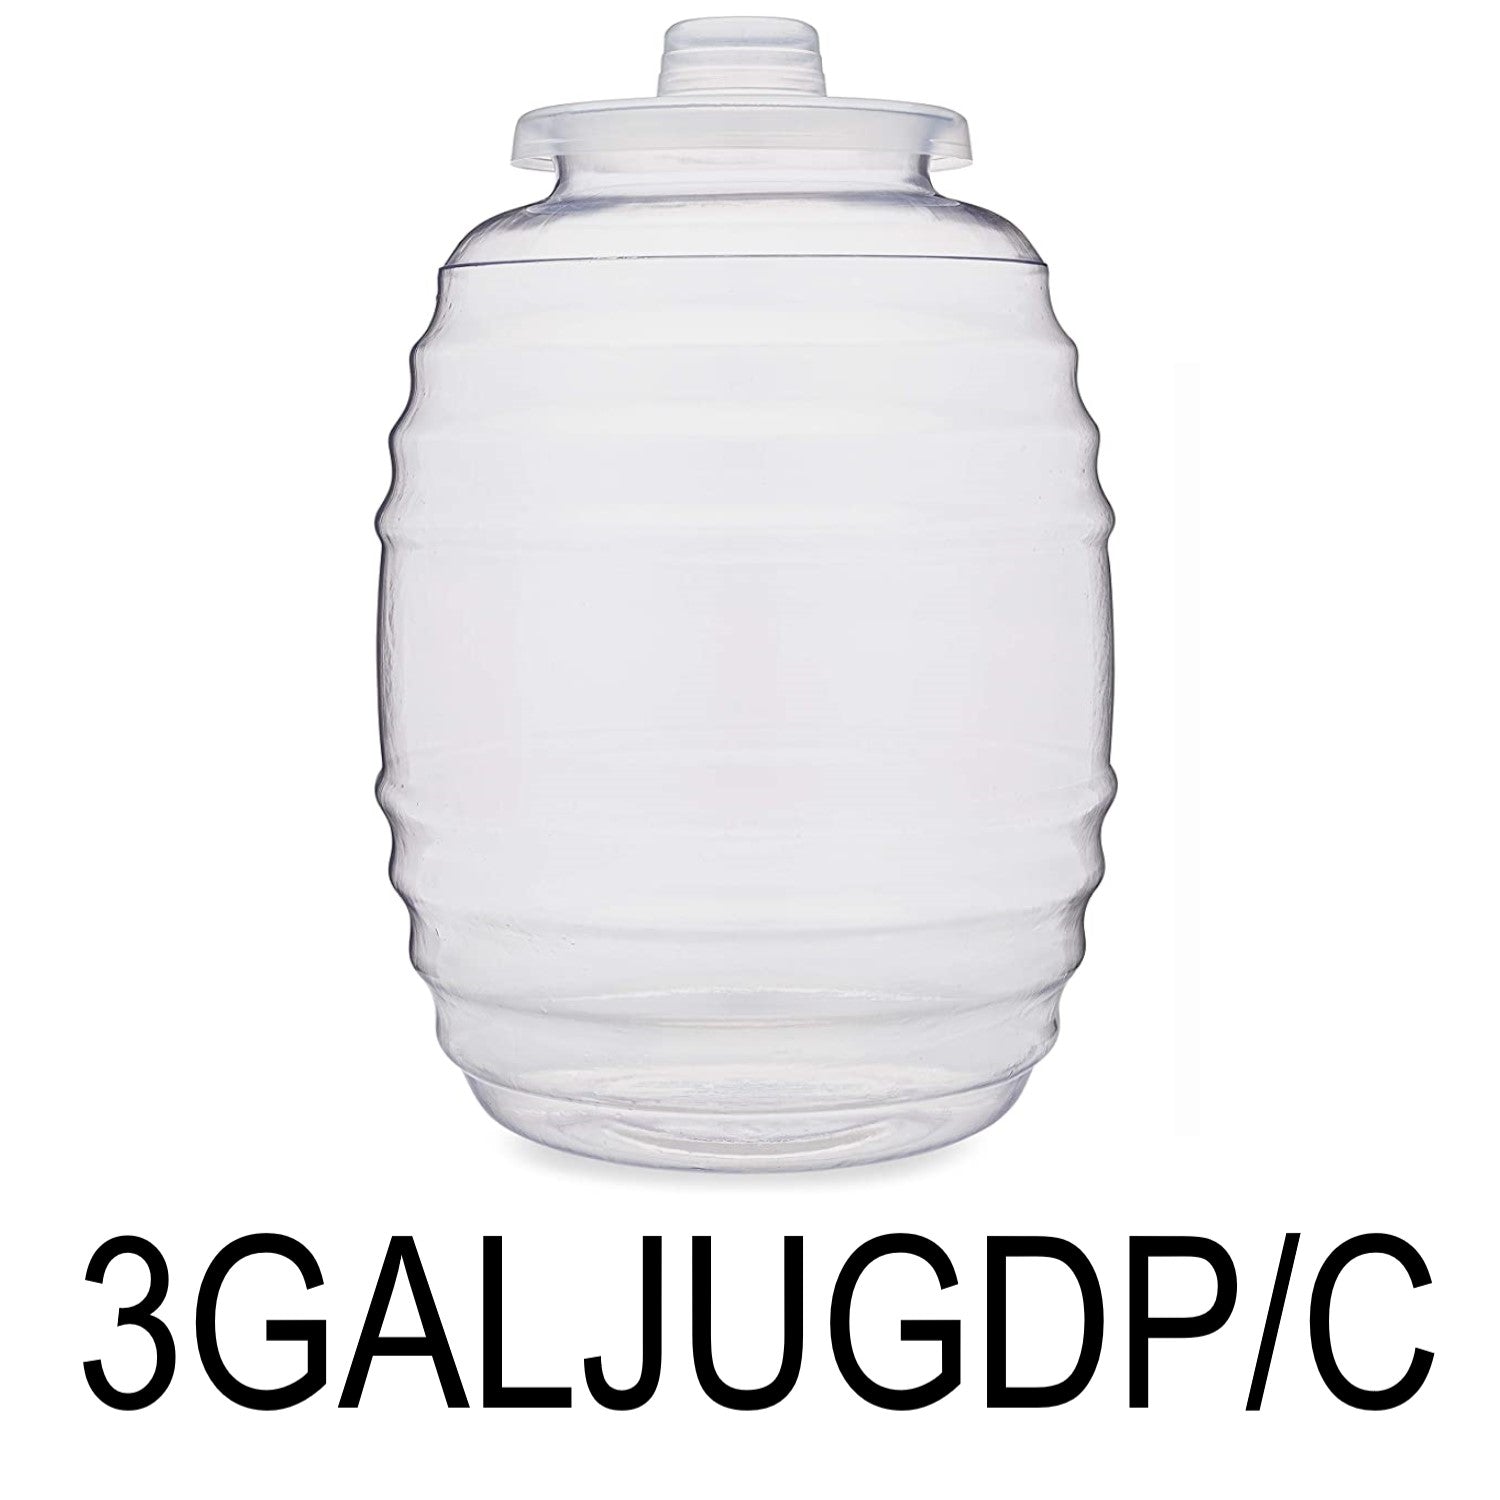 3 Gallon Jug with Lid and Spout - Aguas Frescas Vitrolero Plastic Water  Containe